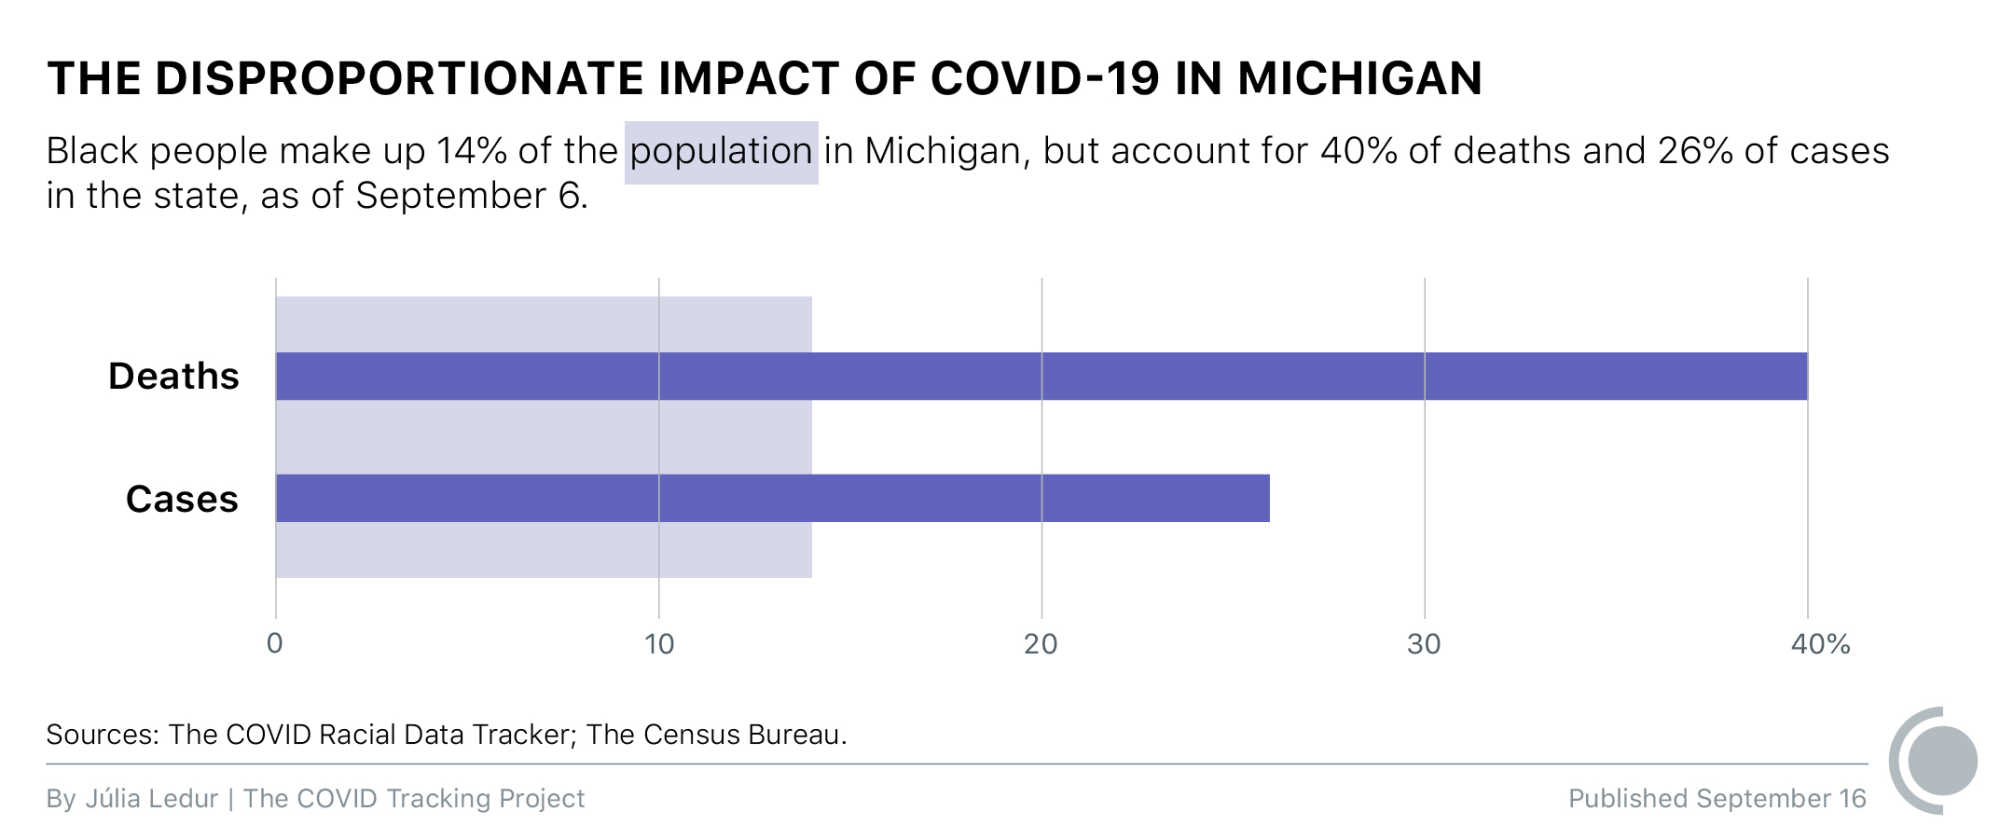 Chart shows the disproportionate impact of COVID-19 in Michigan, where Black people make up 14% of the population but account for 40% of deaths and 26% of cases, as of September 6, 2020.